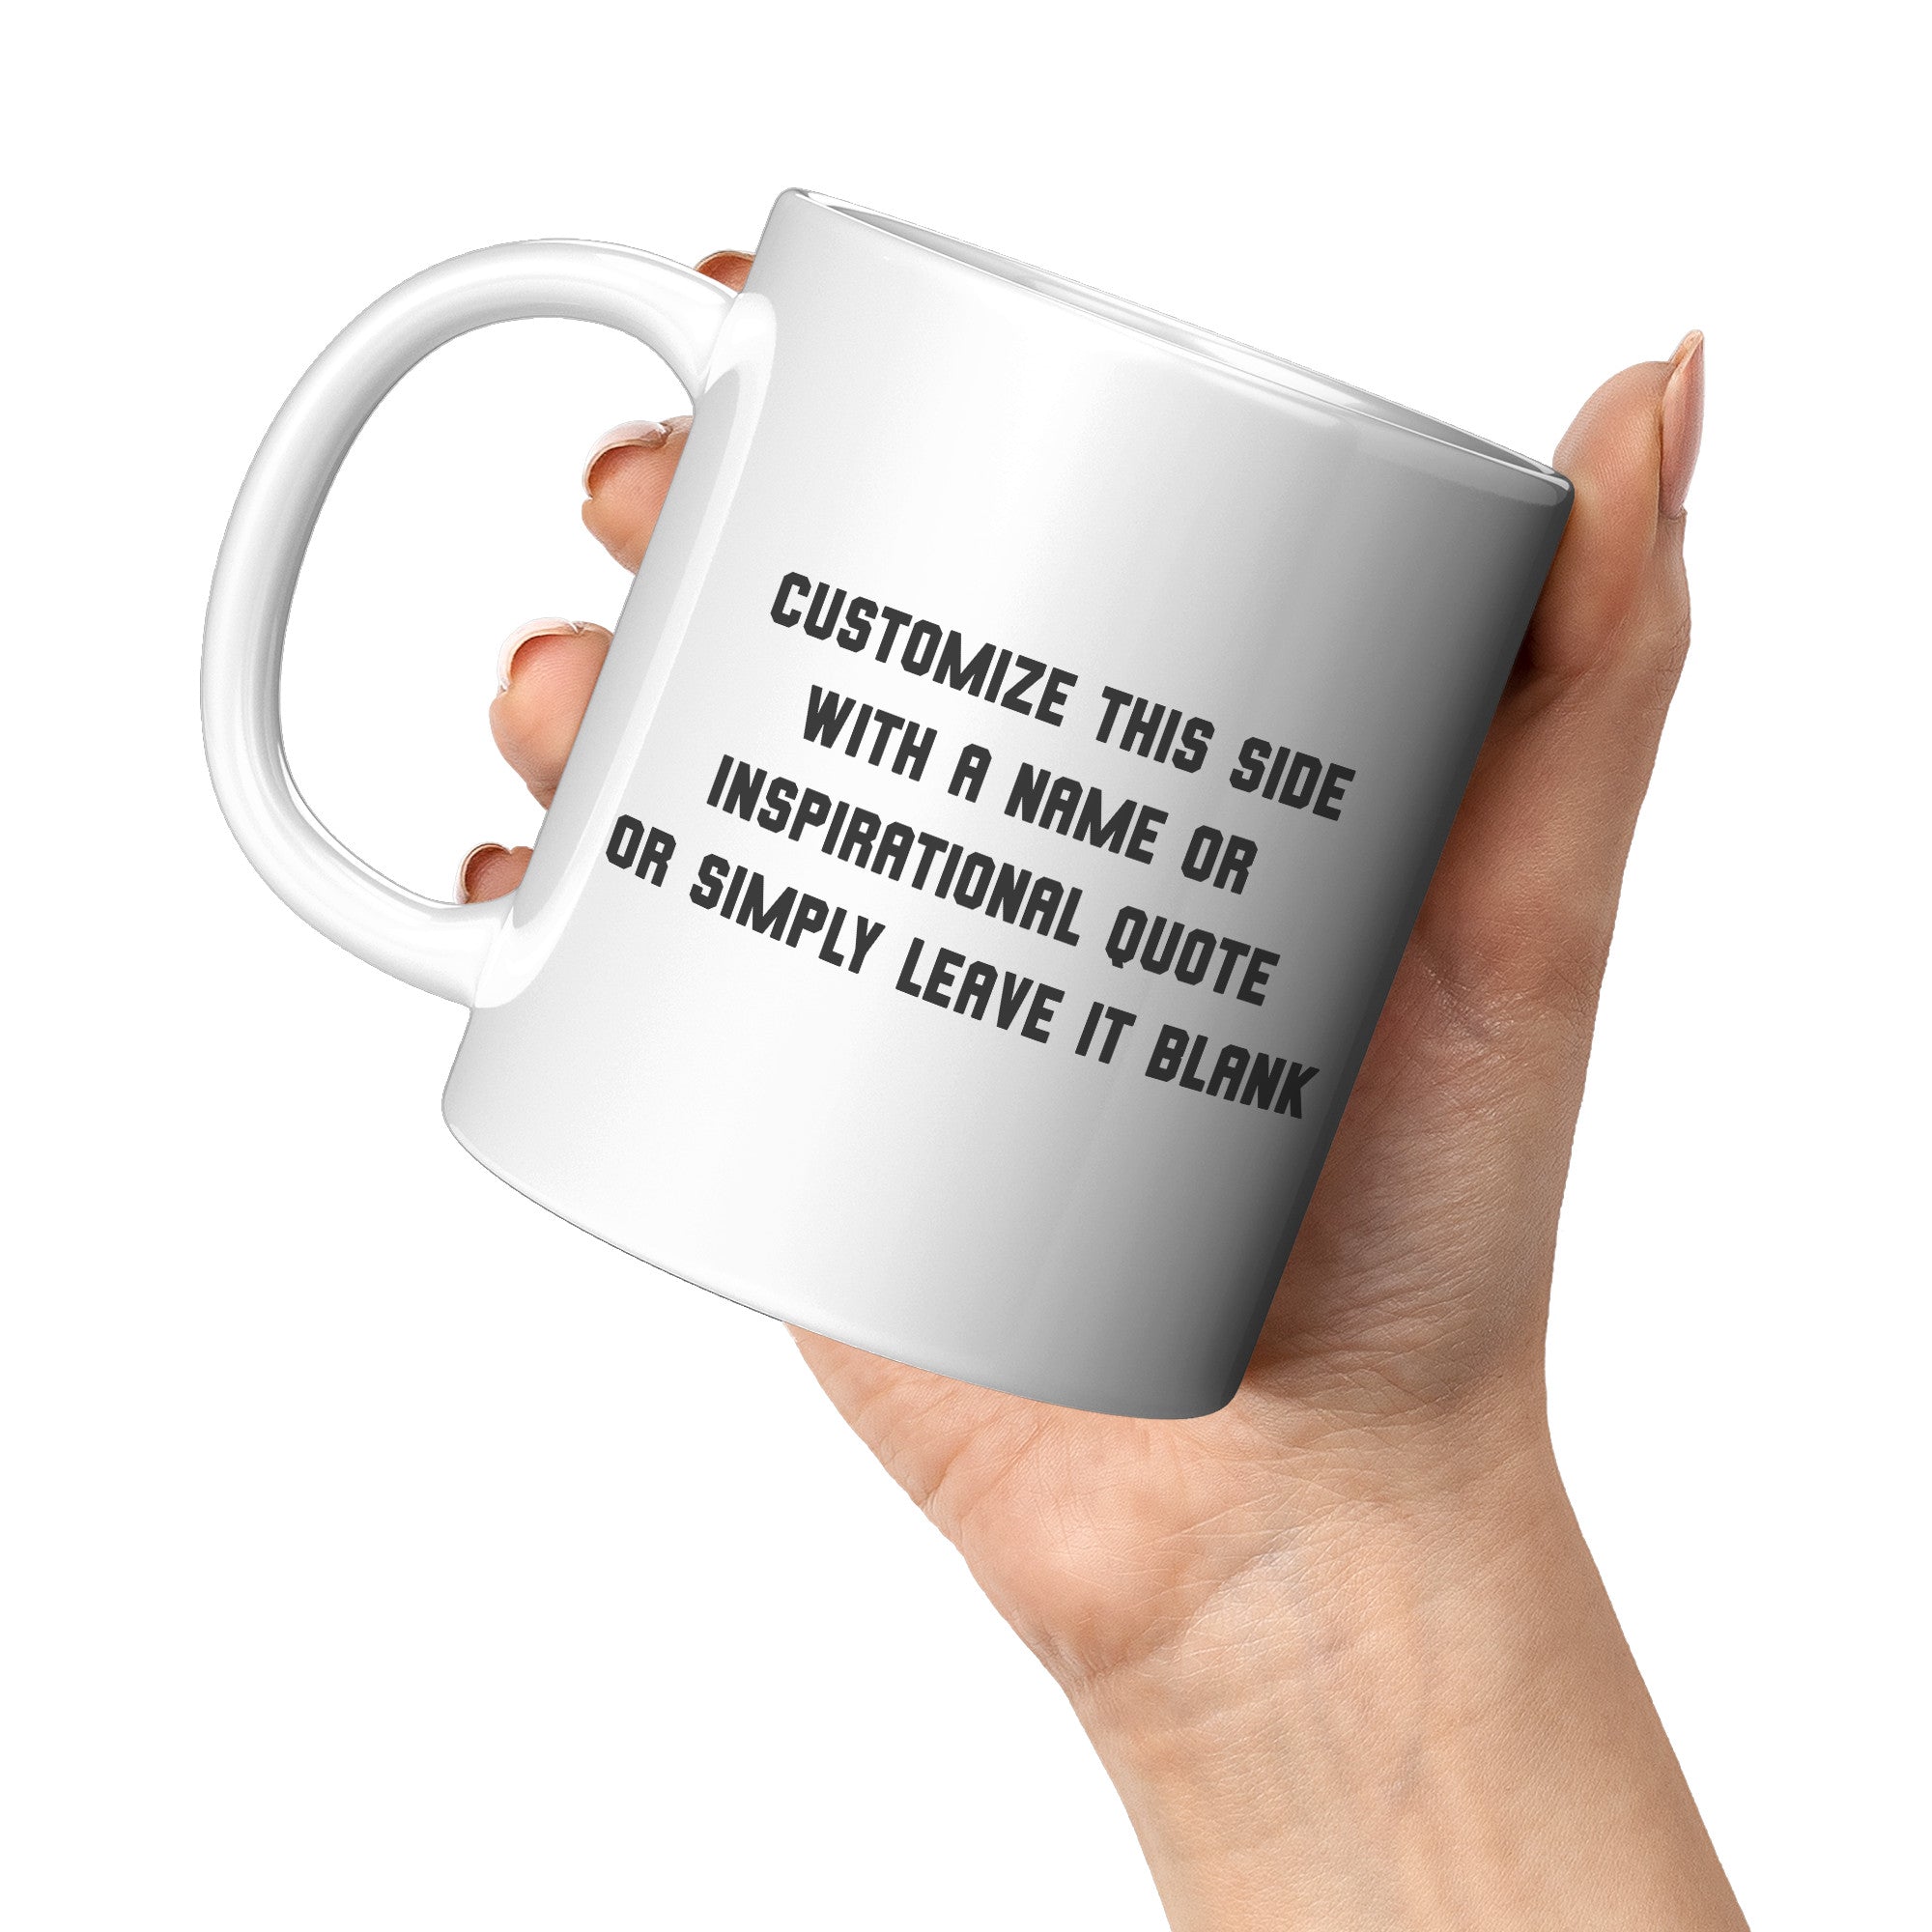 "Female Runner Coffee Mug - Inspirational Running Quotes Cup - Perfect Gift for Women Runners - Motivational Marathoner's Morning Brew" - A